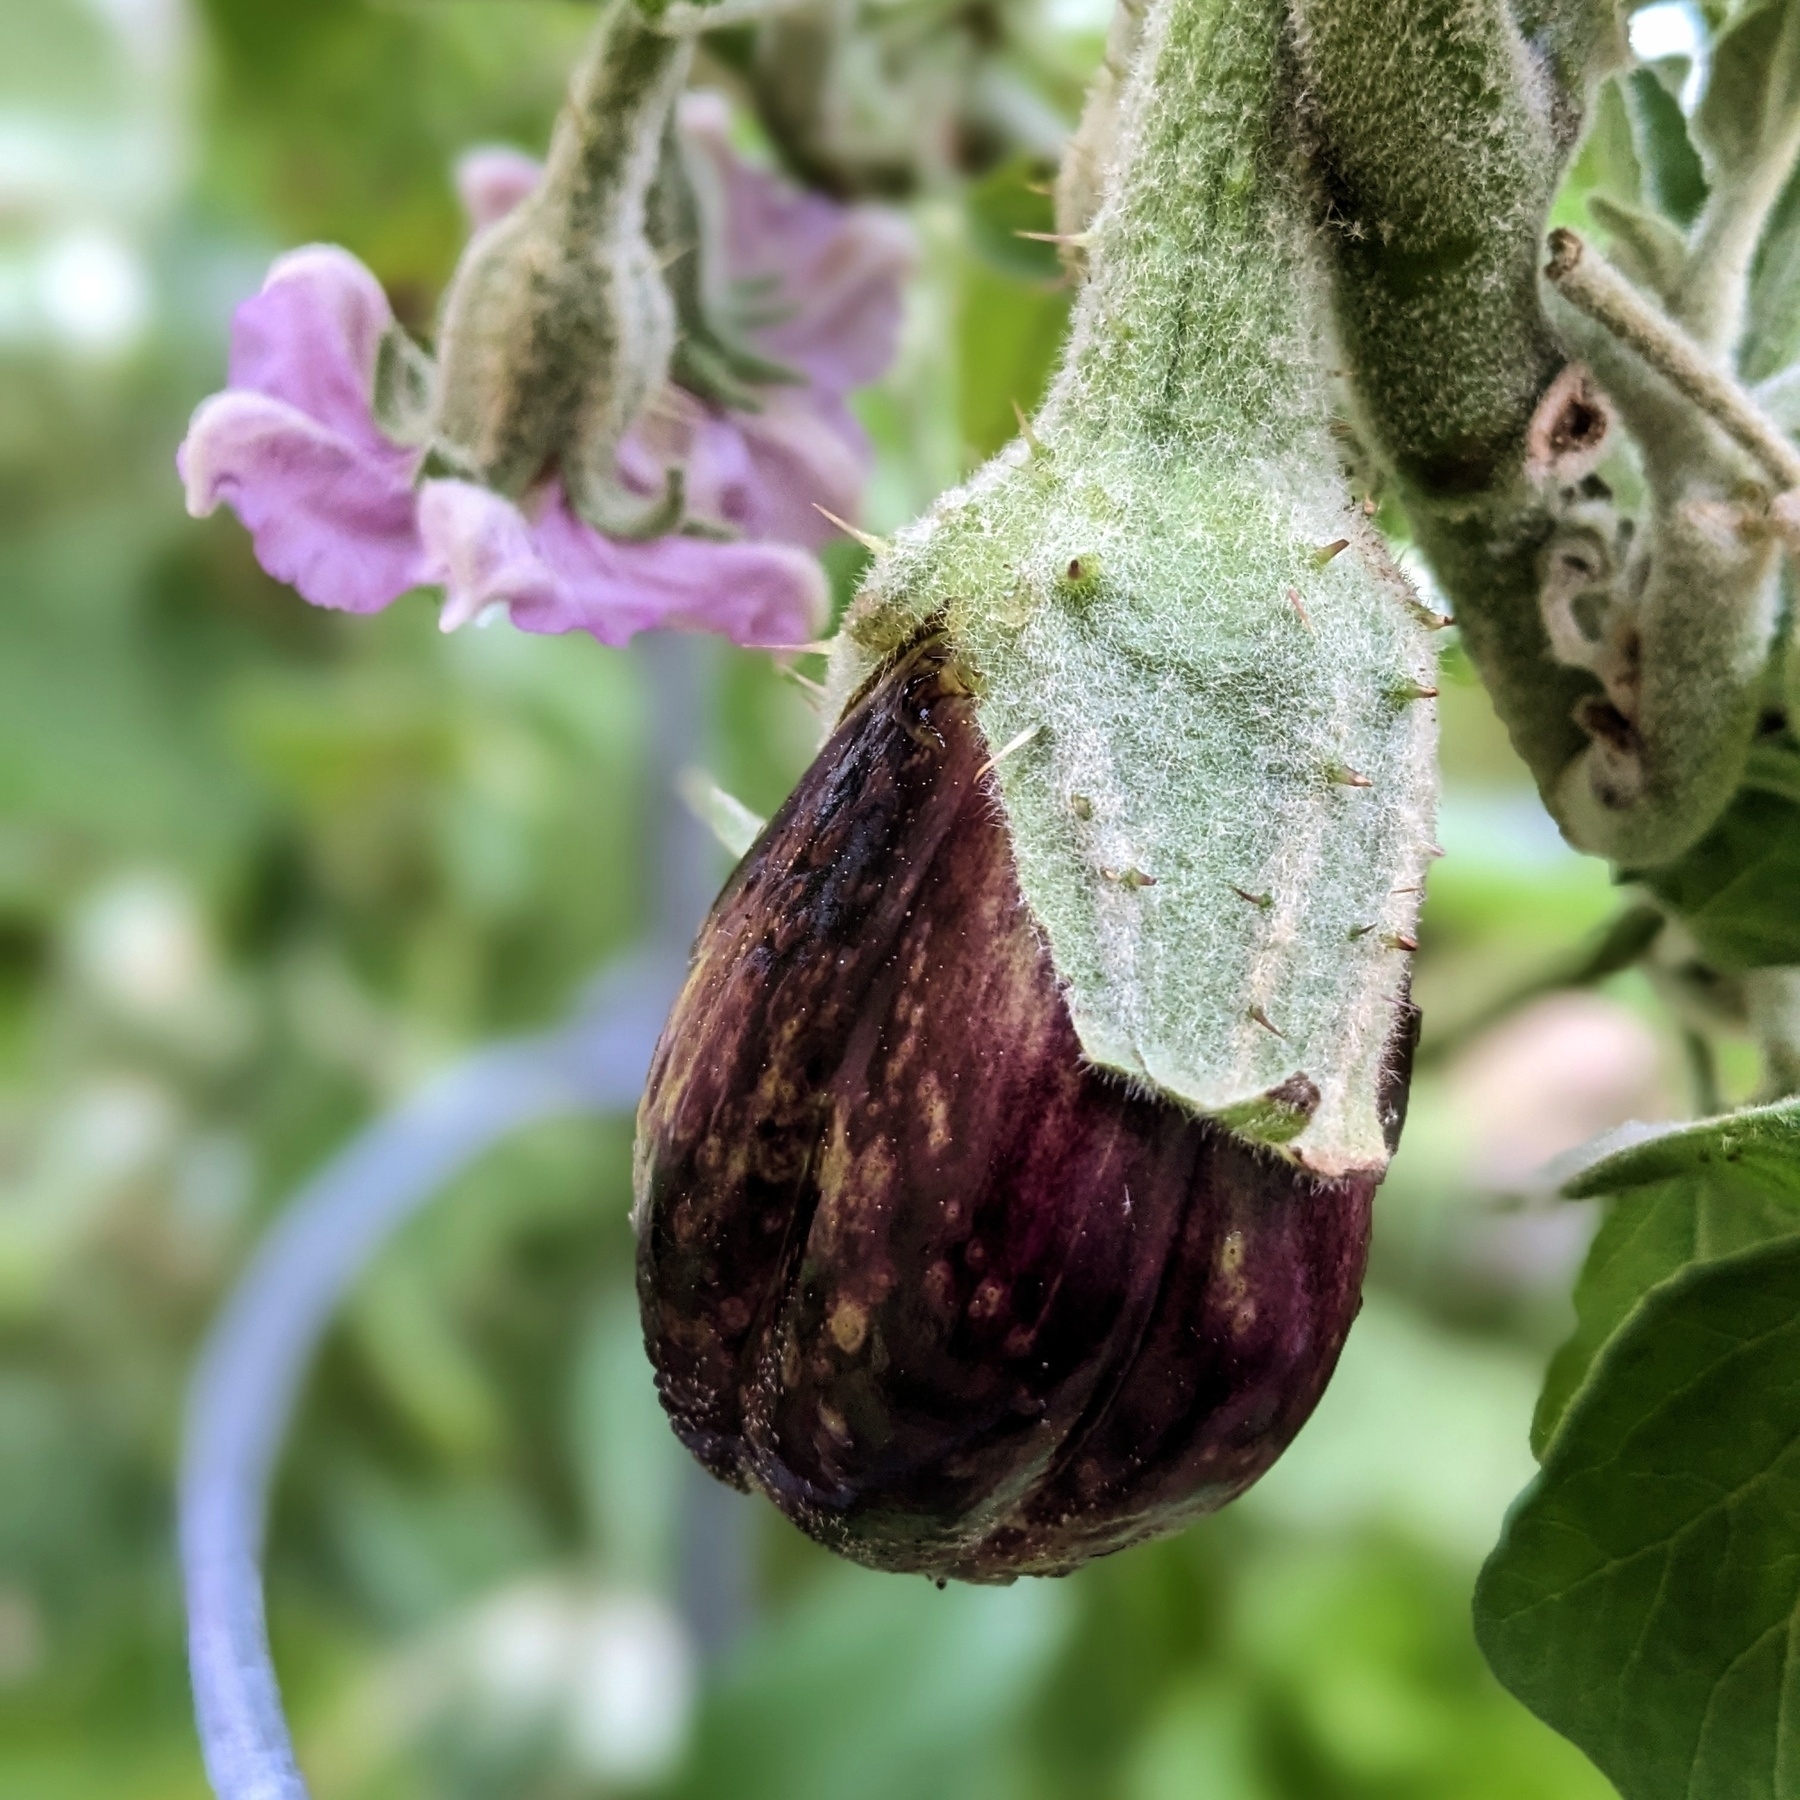 A close up of a small baby eggplant with leaves and a purple eggplant flower in the background.